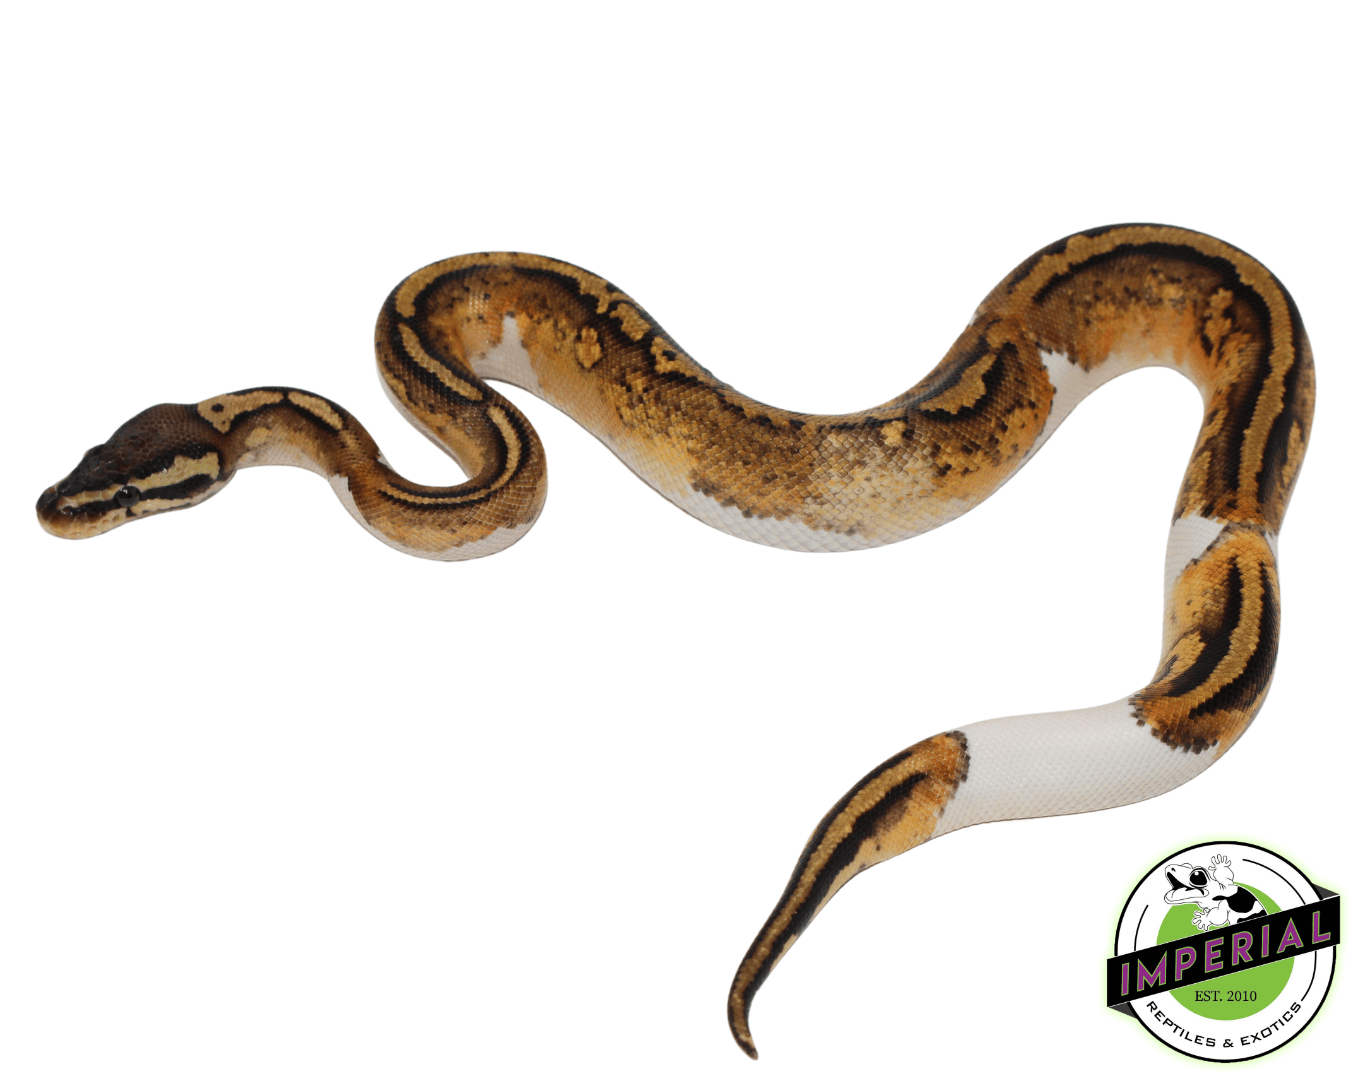 Firefly Yellowbelly Pied ball python for sale, buy reptiles online